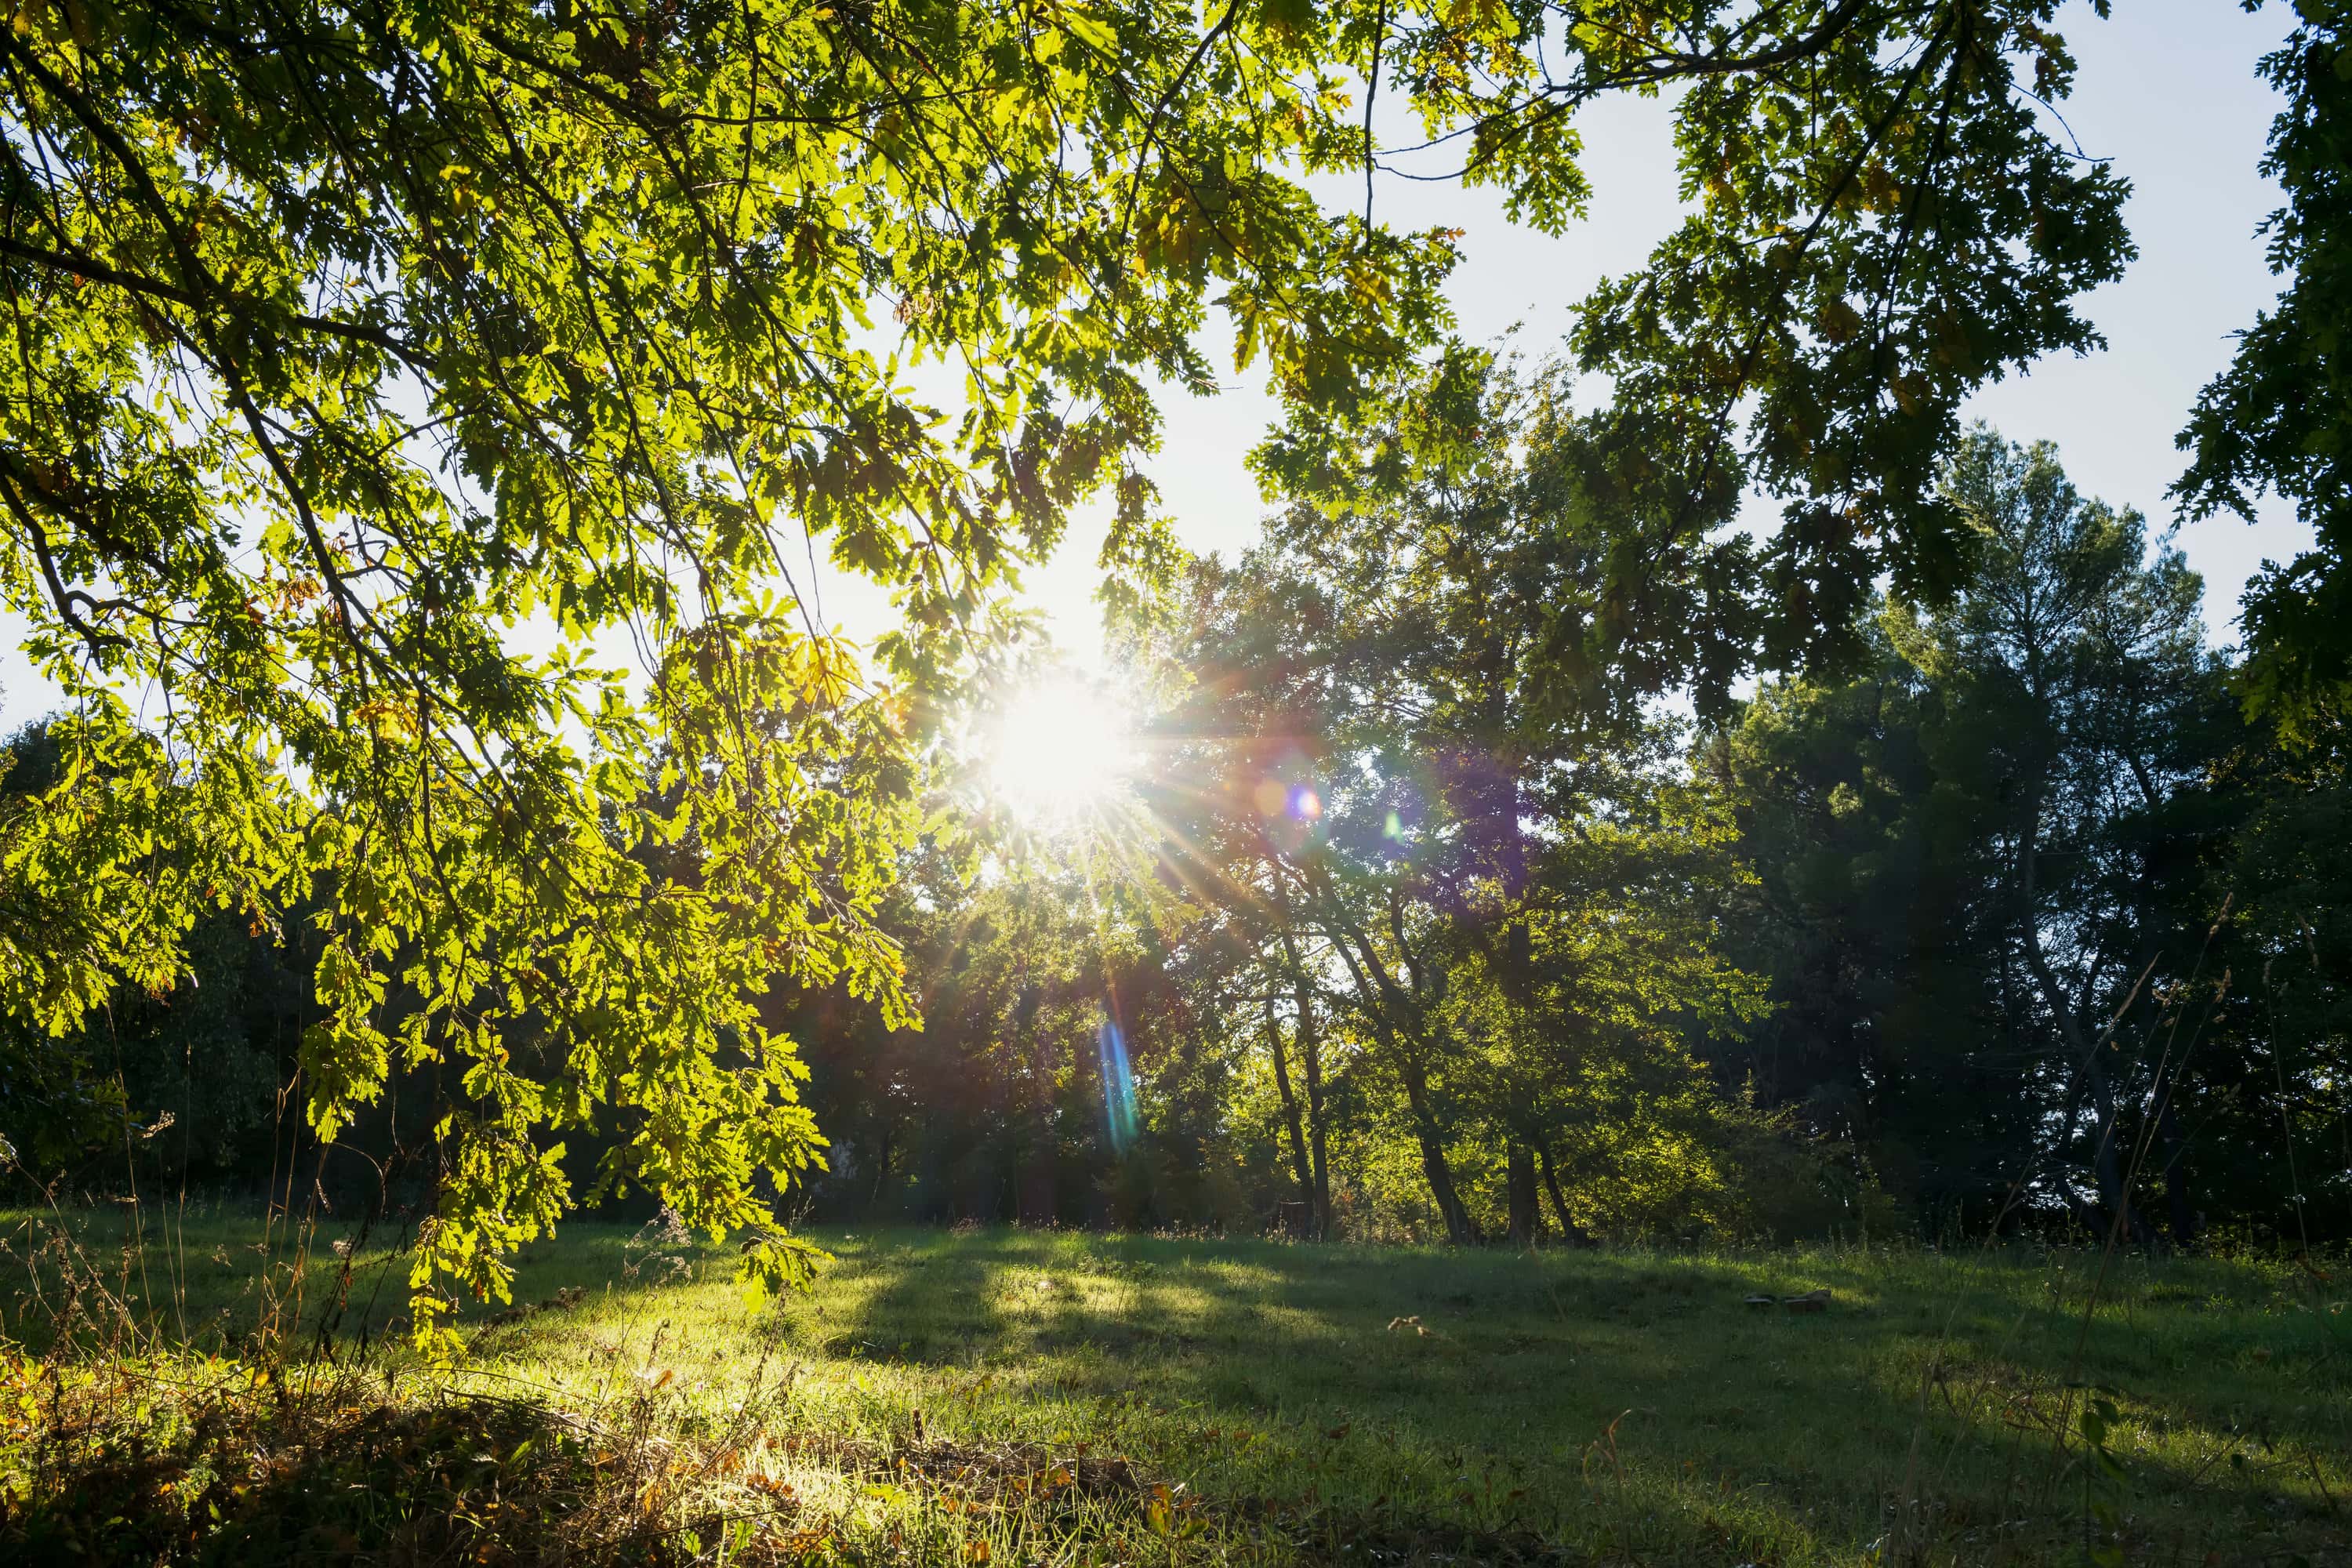 Sunlight shines through the trees in a grassy park.